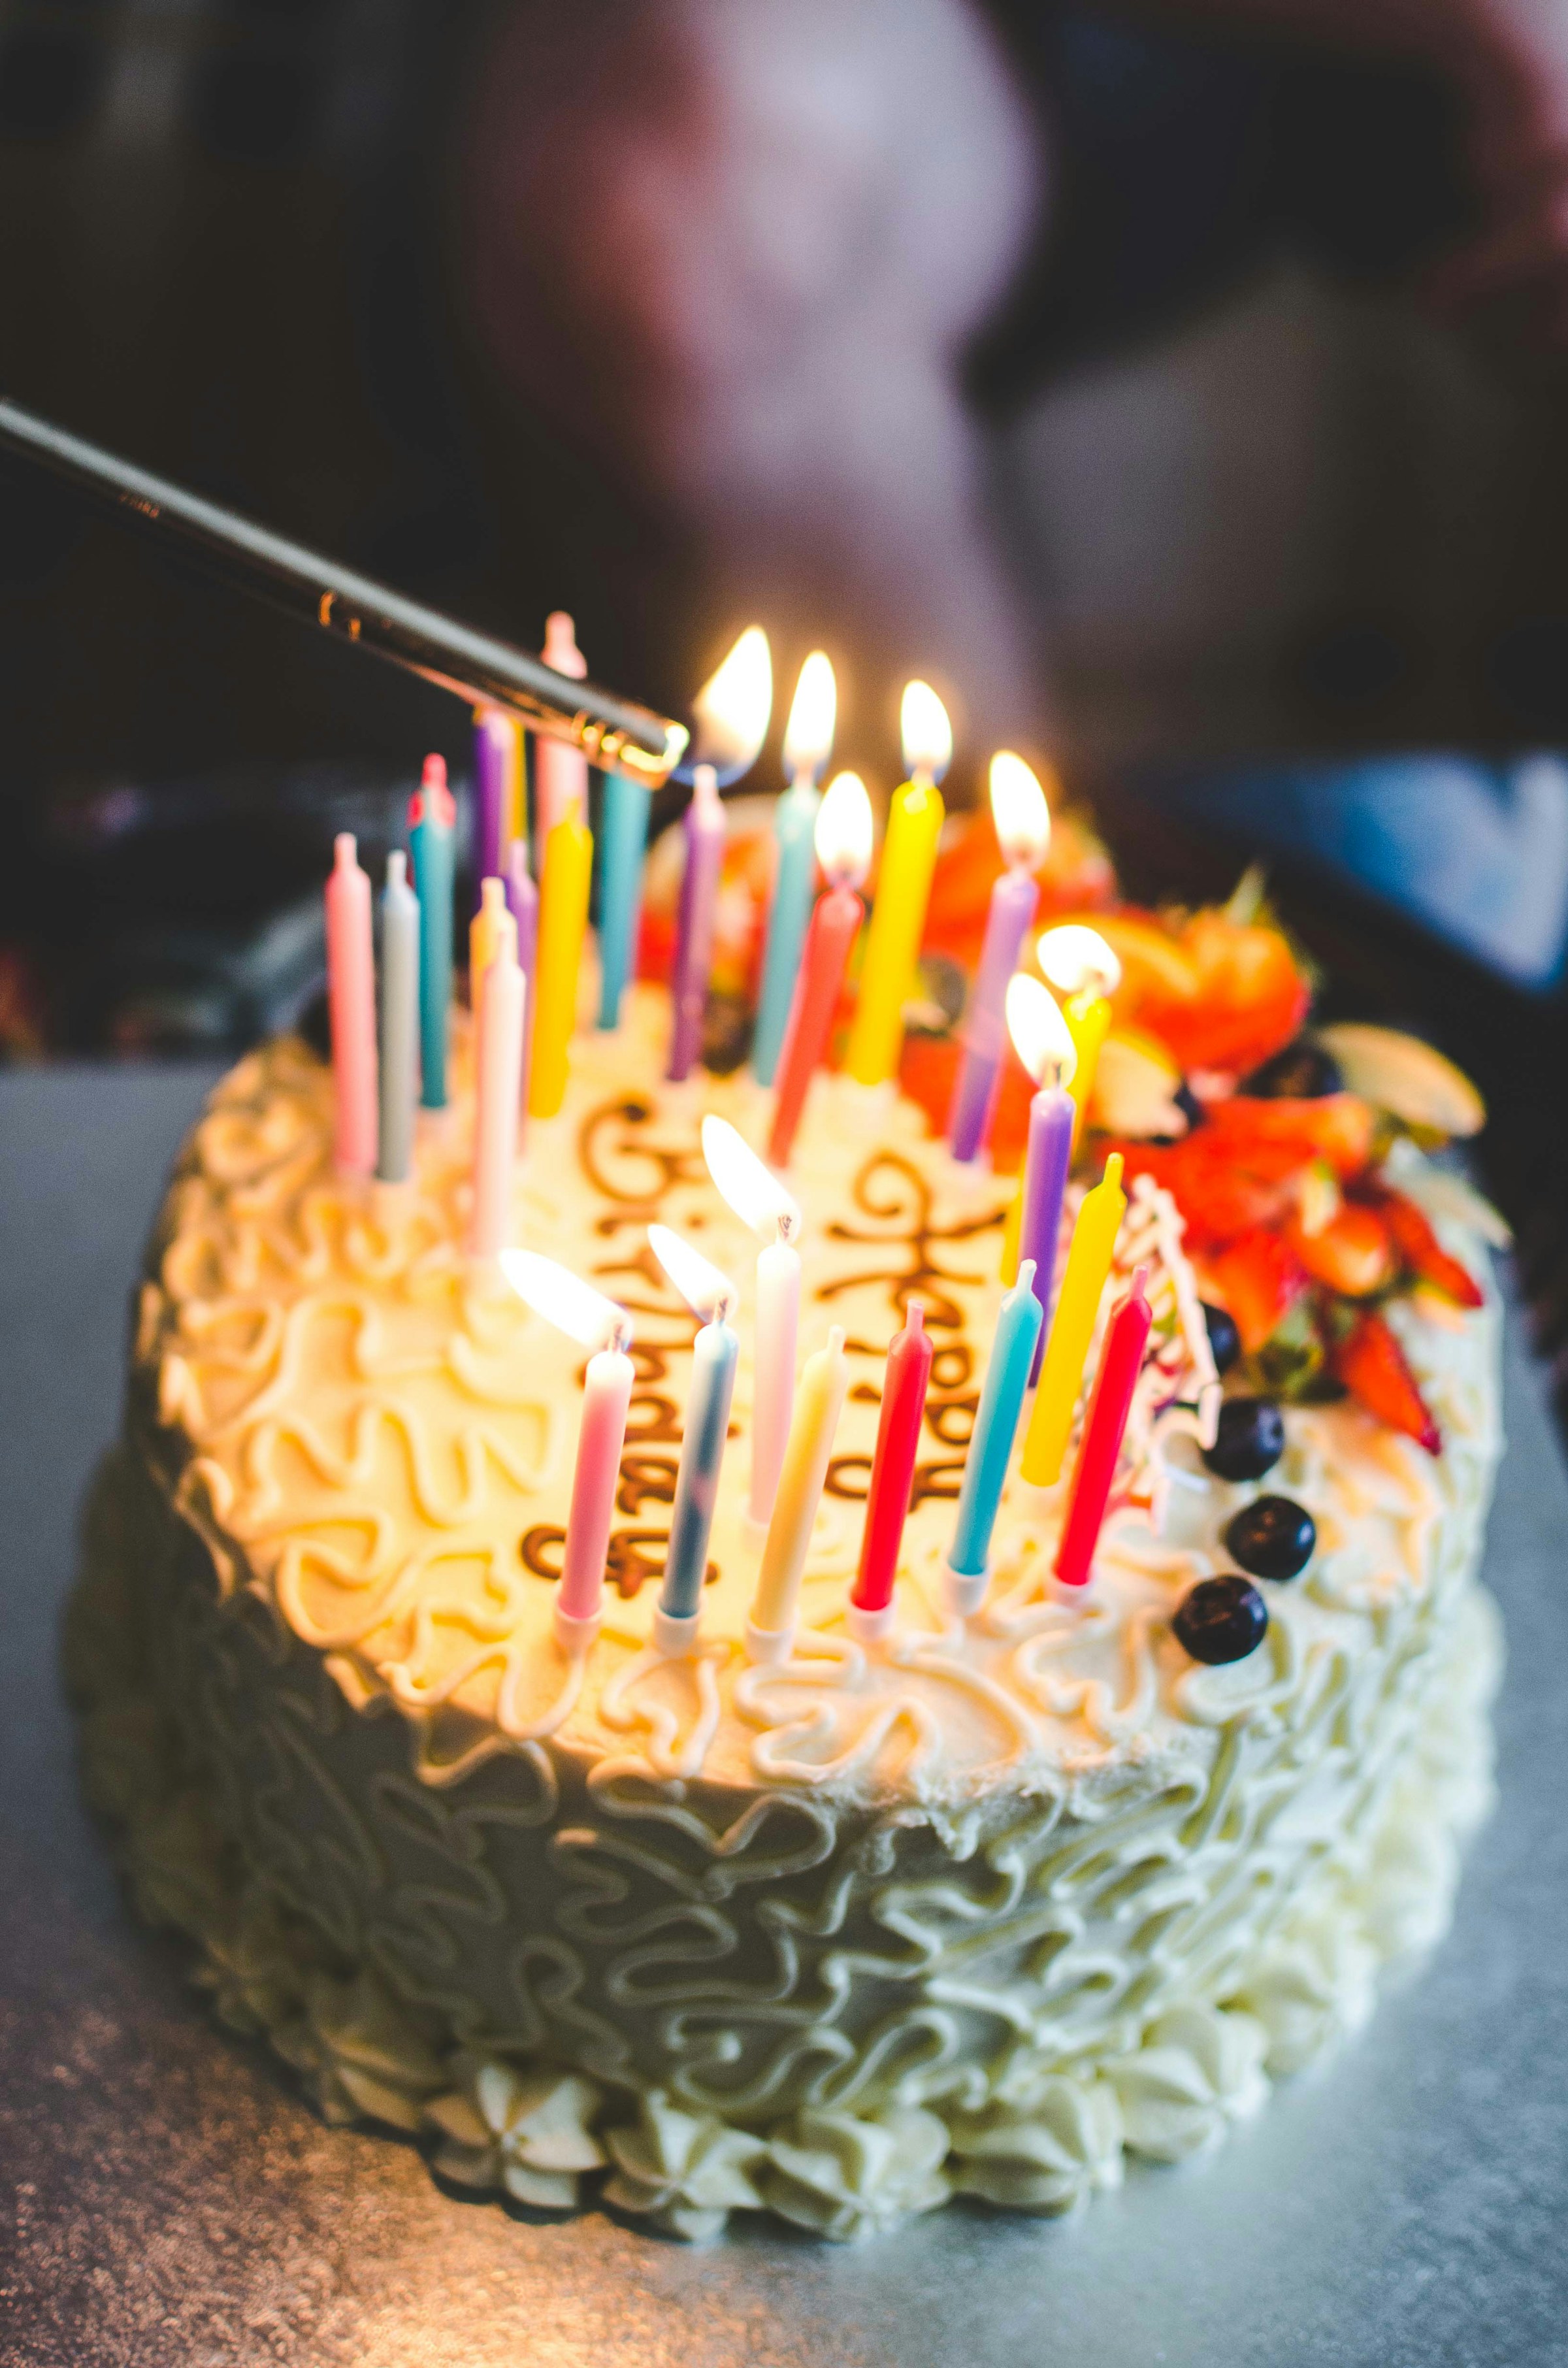 A birthday cake with candles | Source: Unsplash